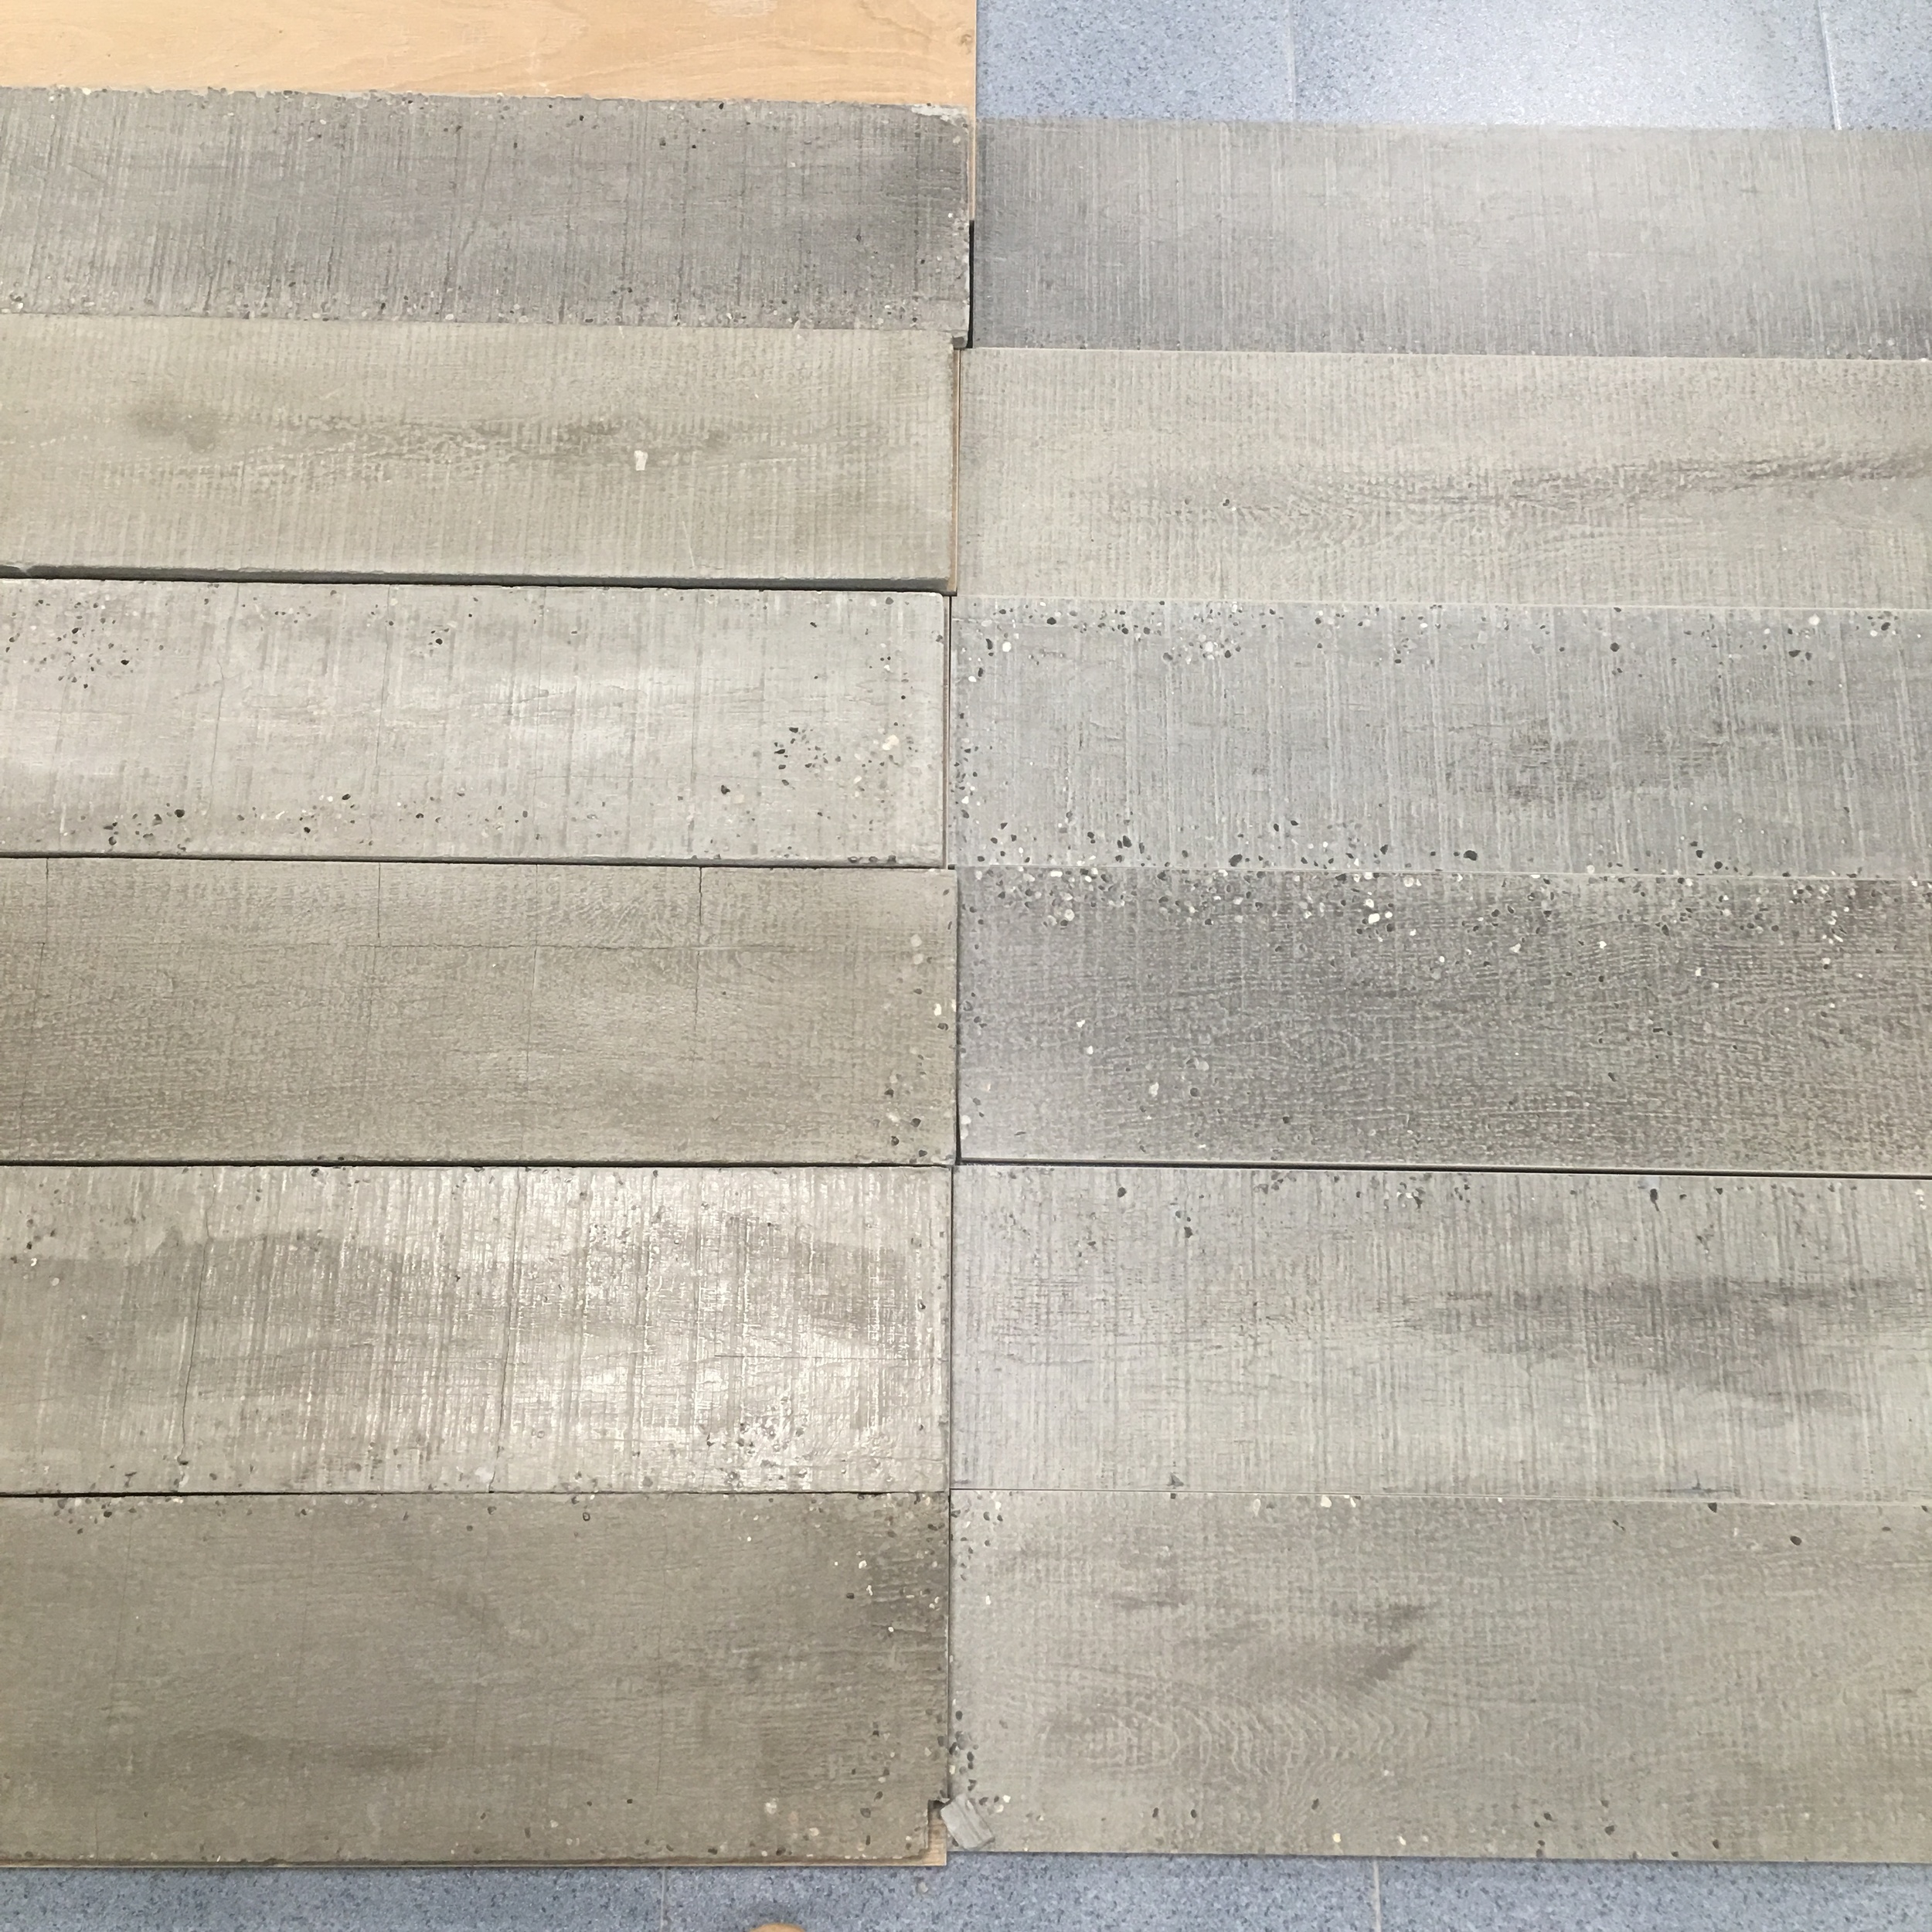 Comparing the timber boards and the wood effect tiles